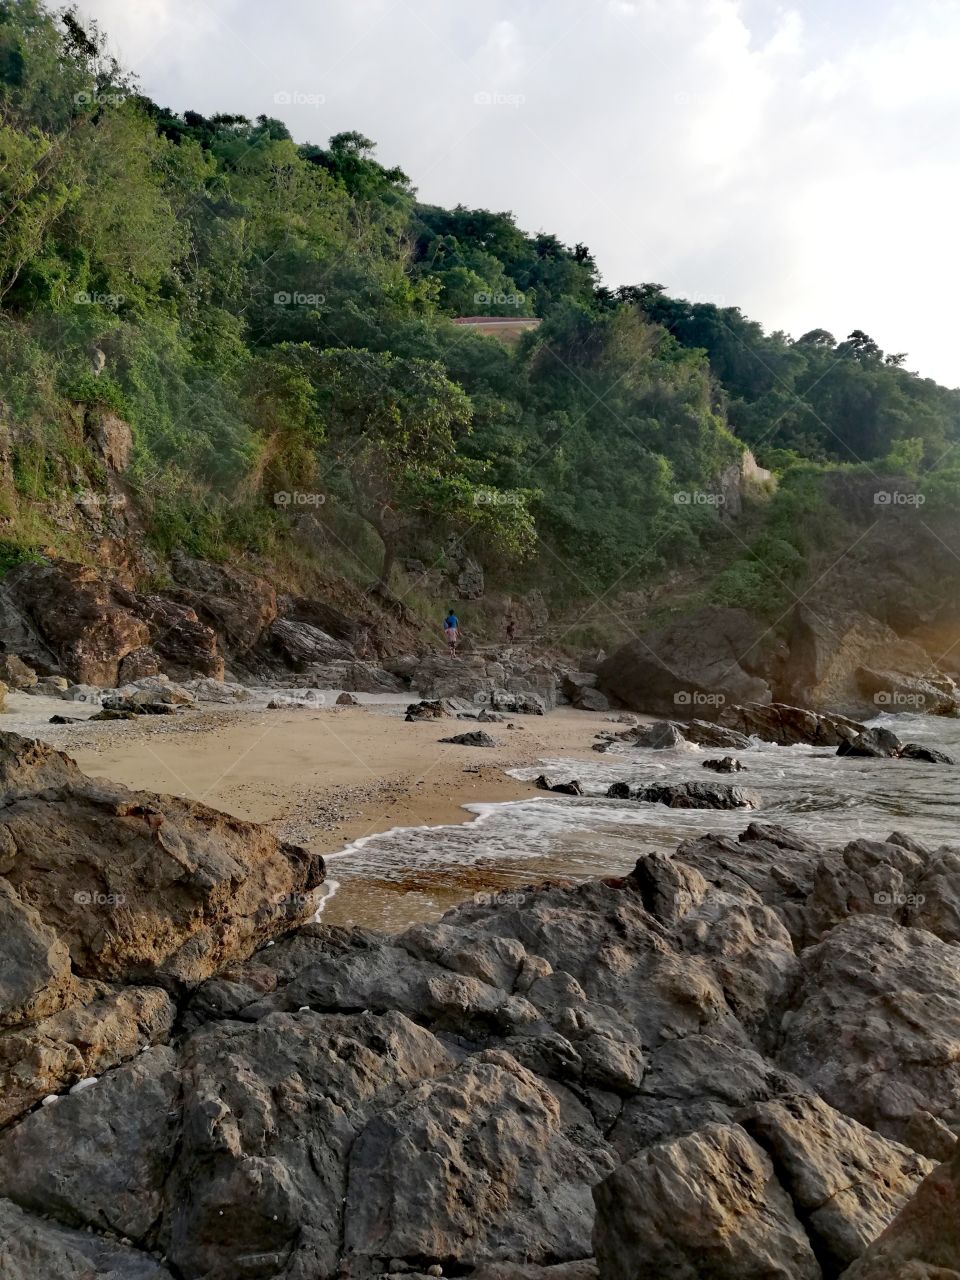 Dreamy beach scenery, sandy rocky beach surrounded by tropical rainforest hills and tropical Chinese Sea